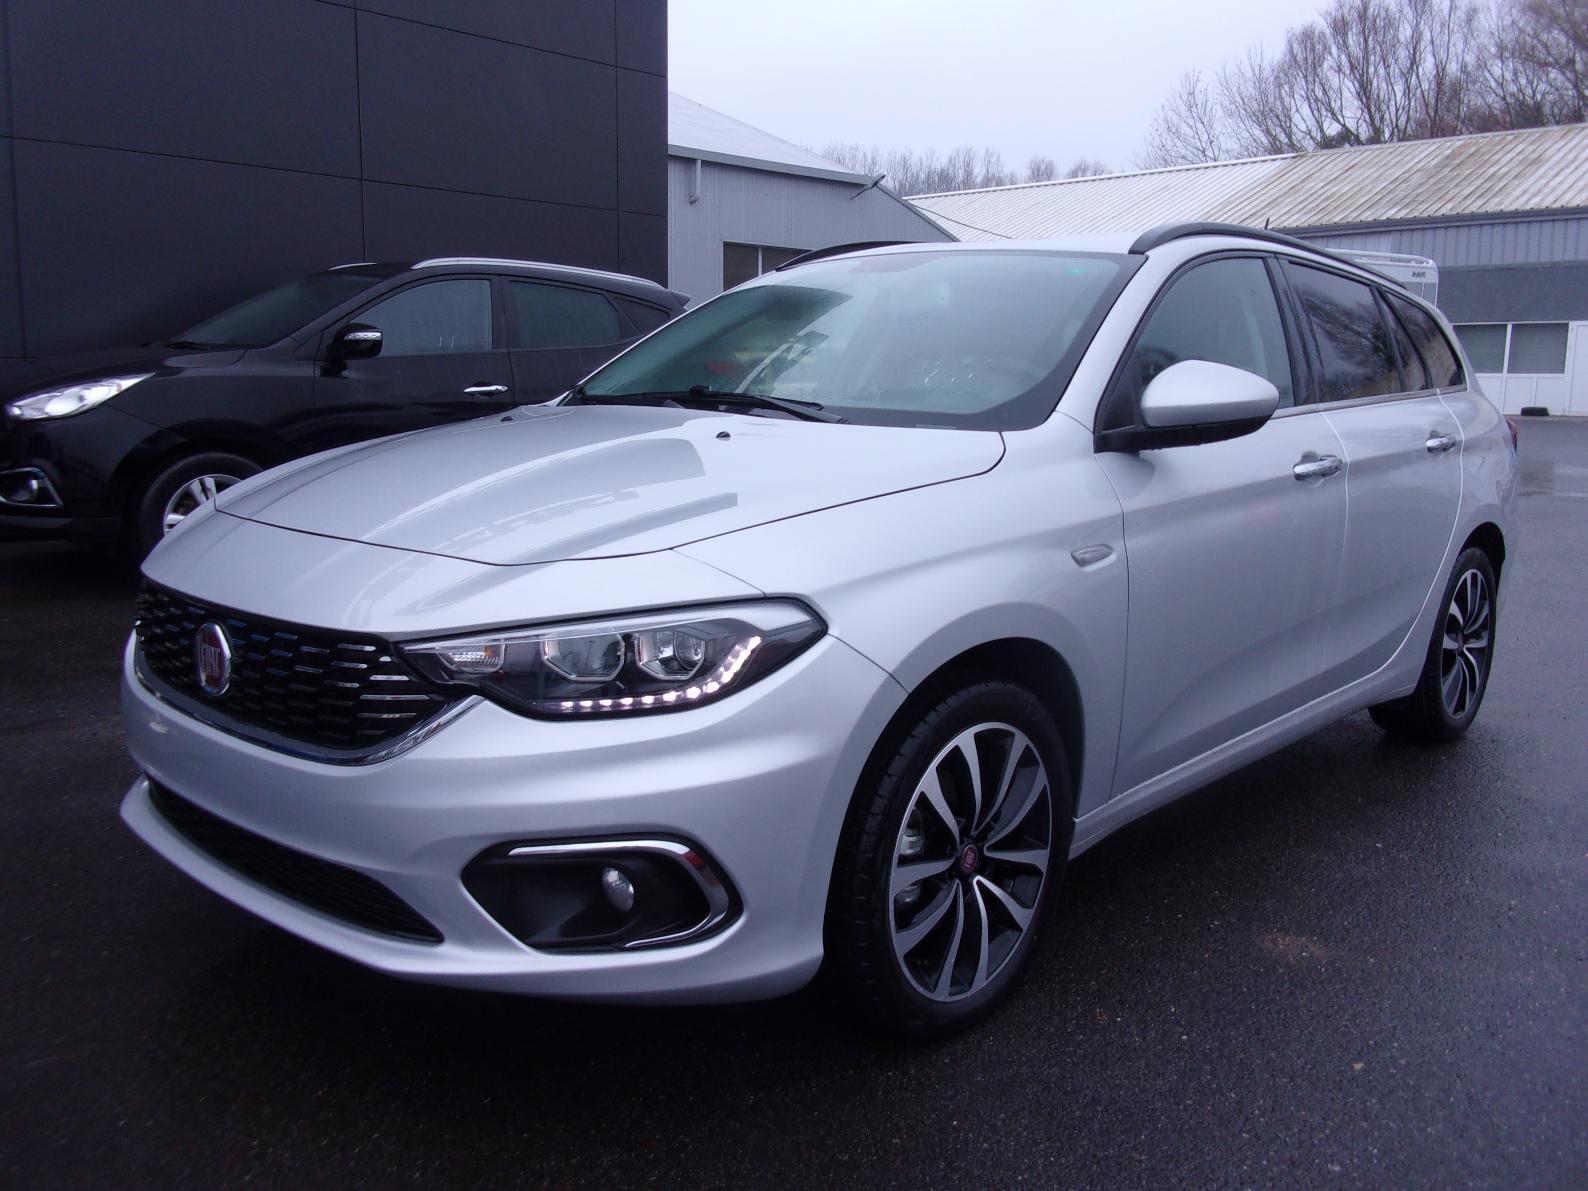 FIAT TIPO STATION WAGON MY19 E6D Tipo Station Wagon 1.4